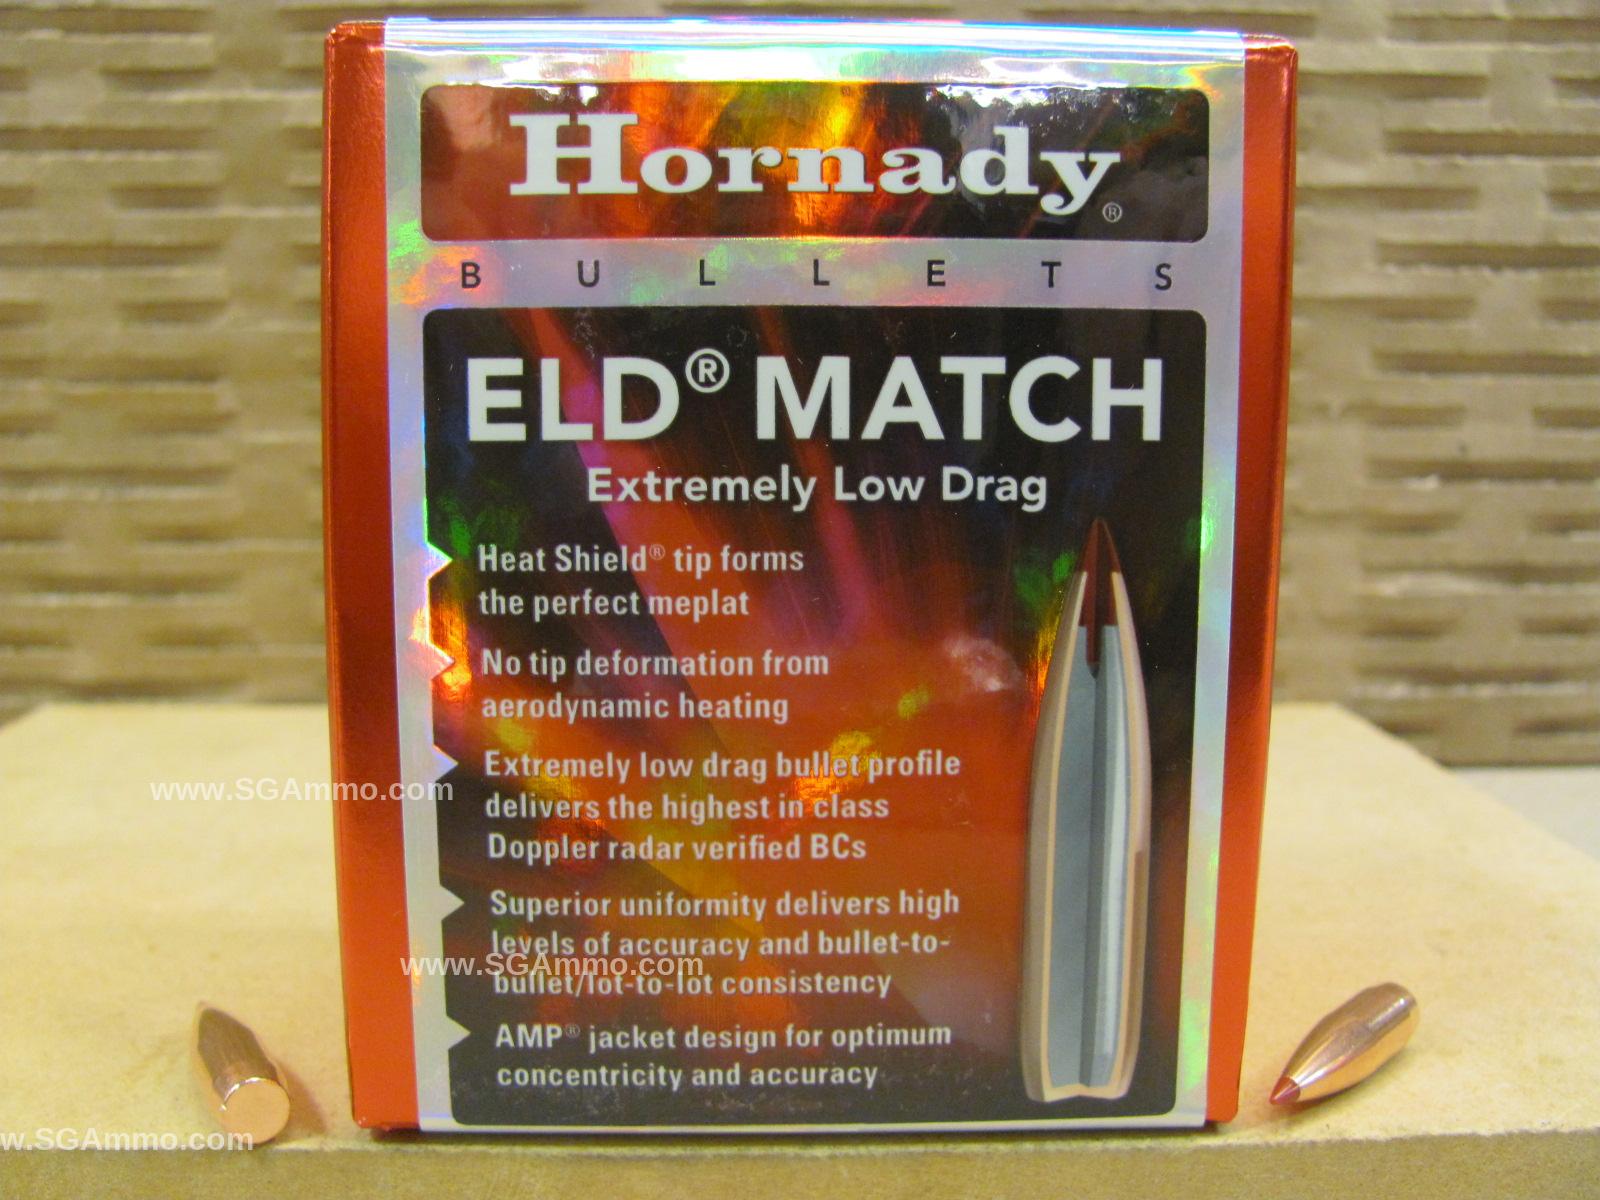 100 Count Box - 30 Cal 155 Grain ELD Match Projectile For Handloading .308